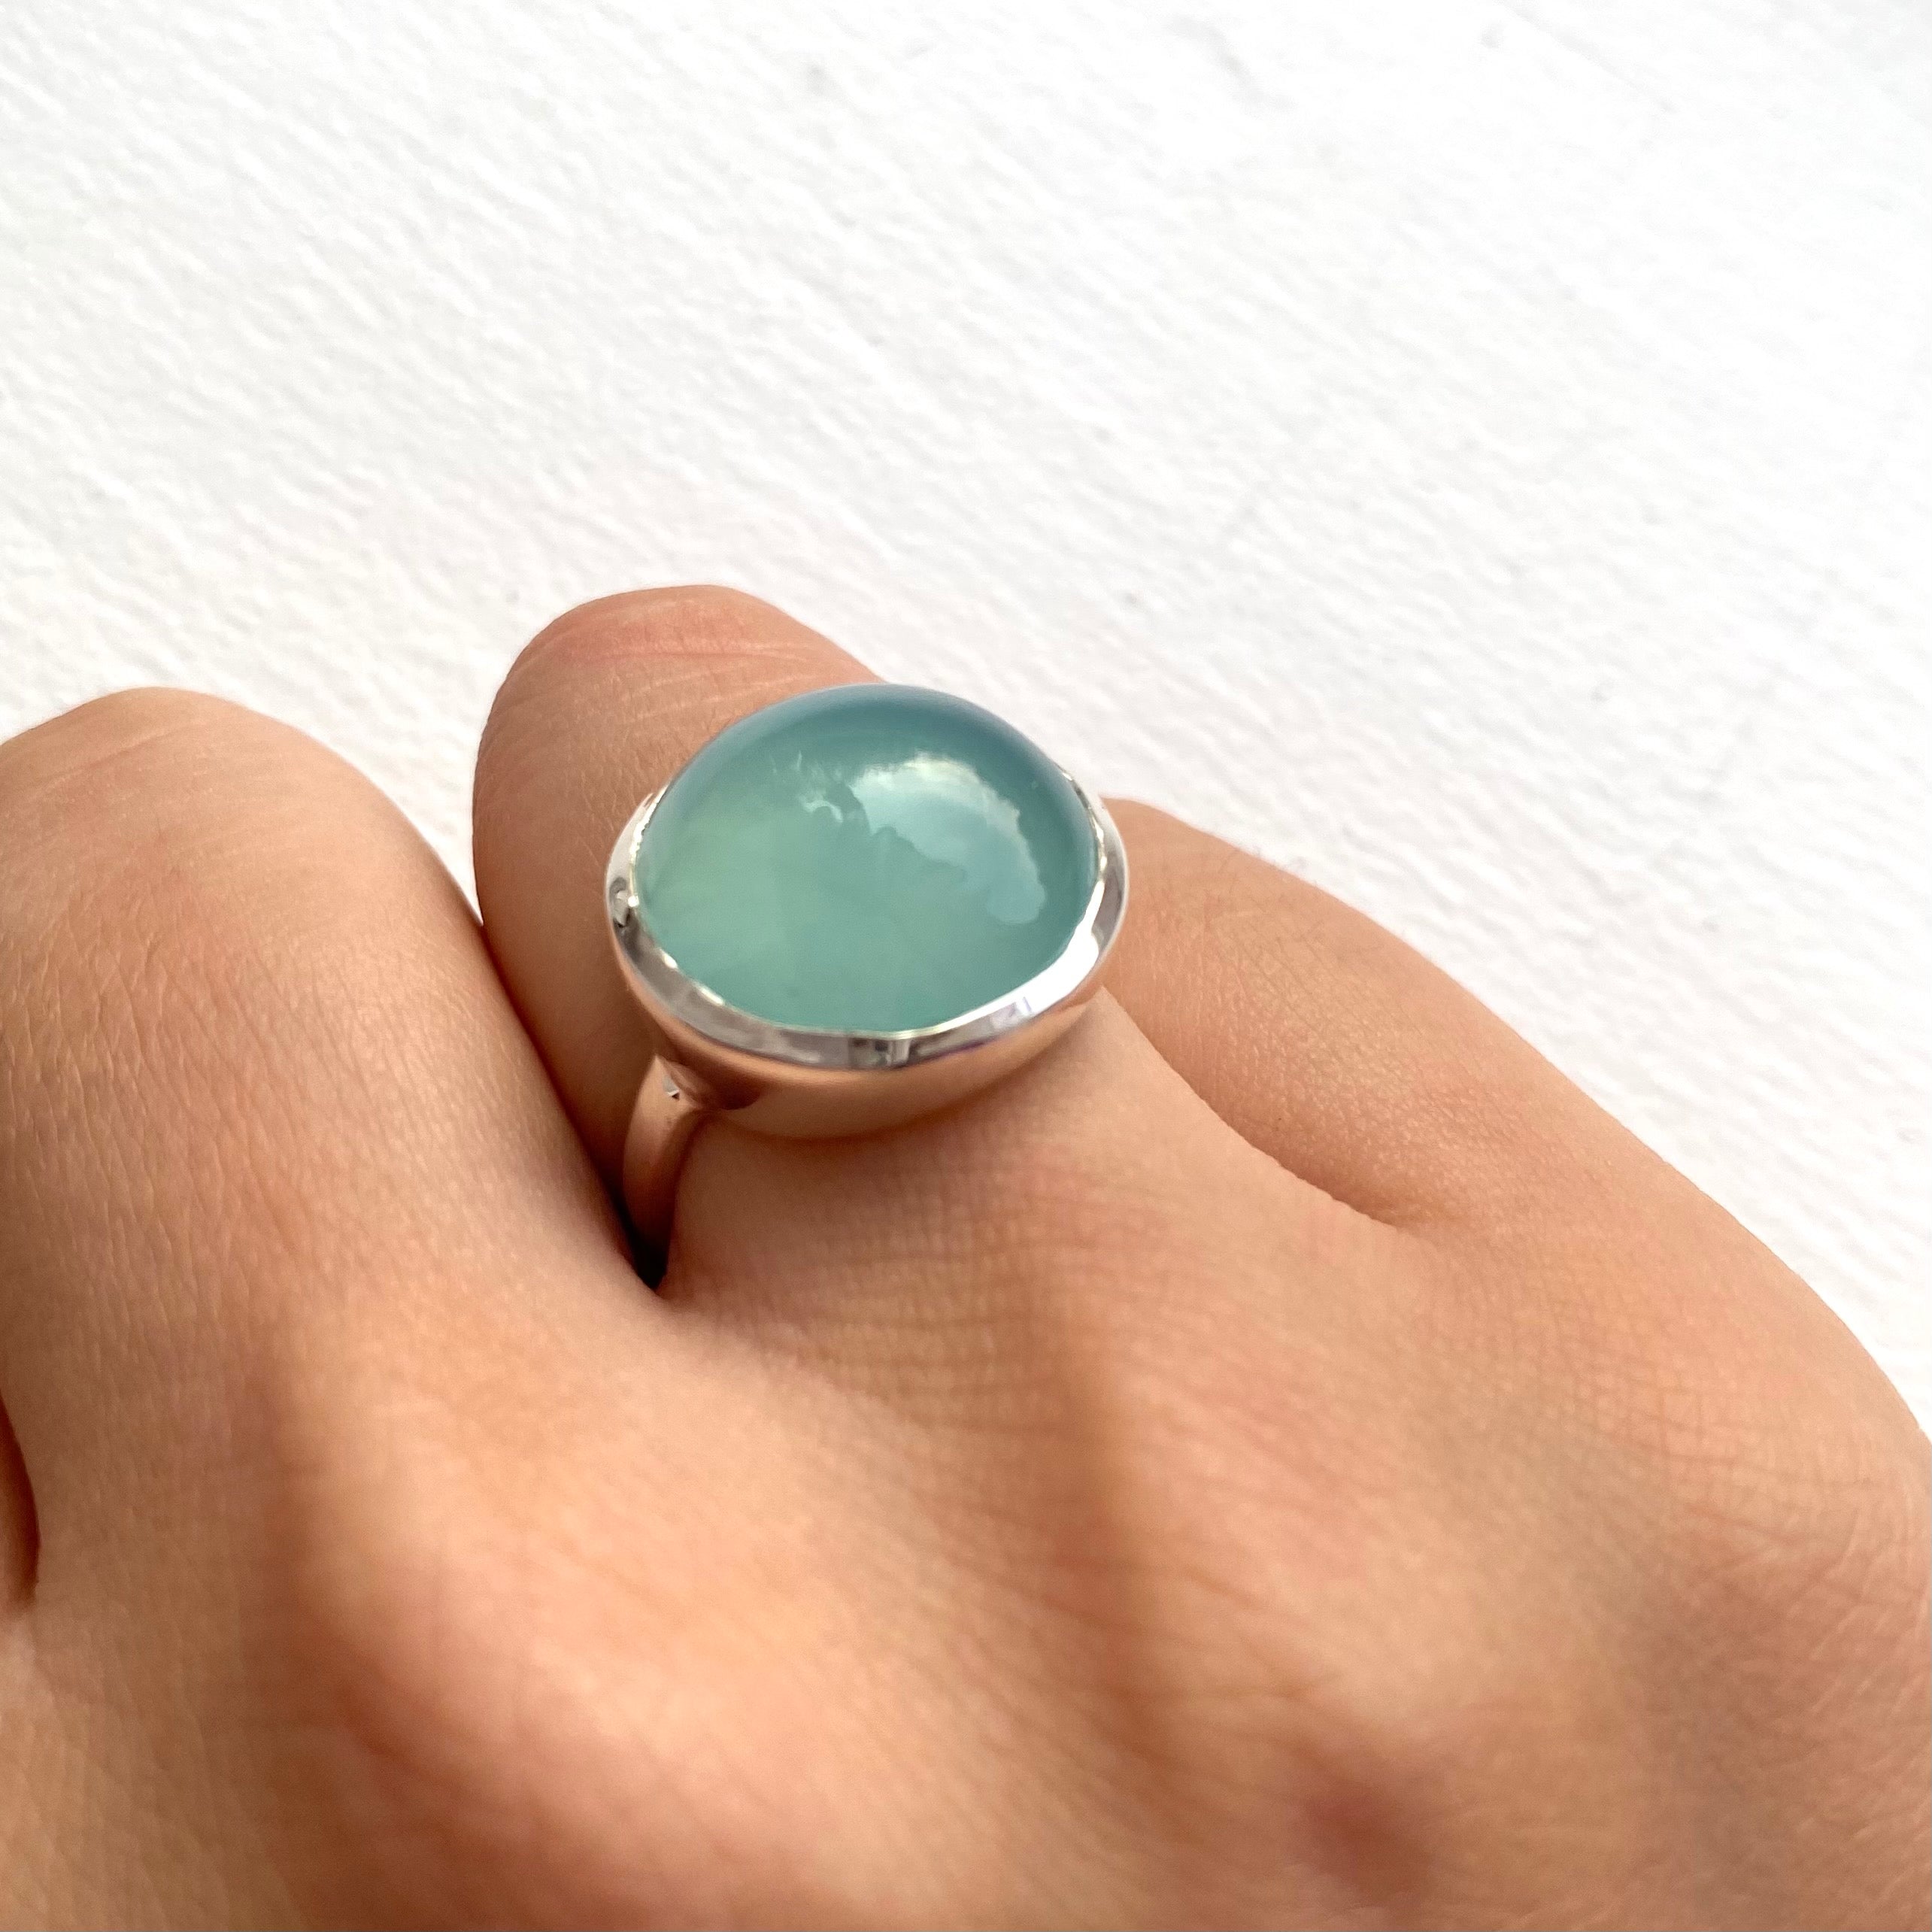 Cabochon Round Cut Natural Gemstone Sterling Silver Ring - Aqua Chalcedony